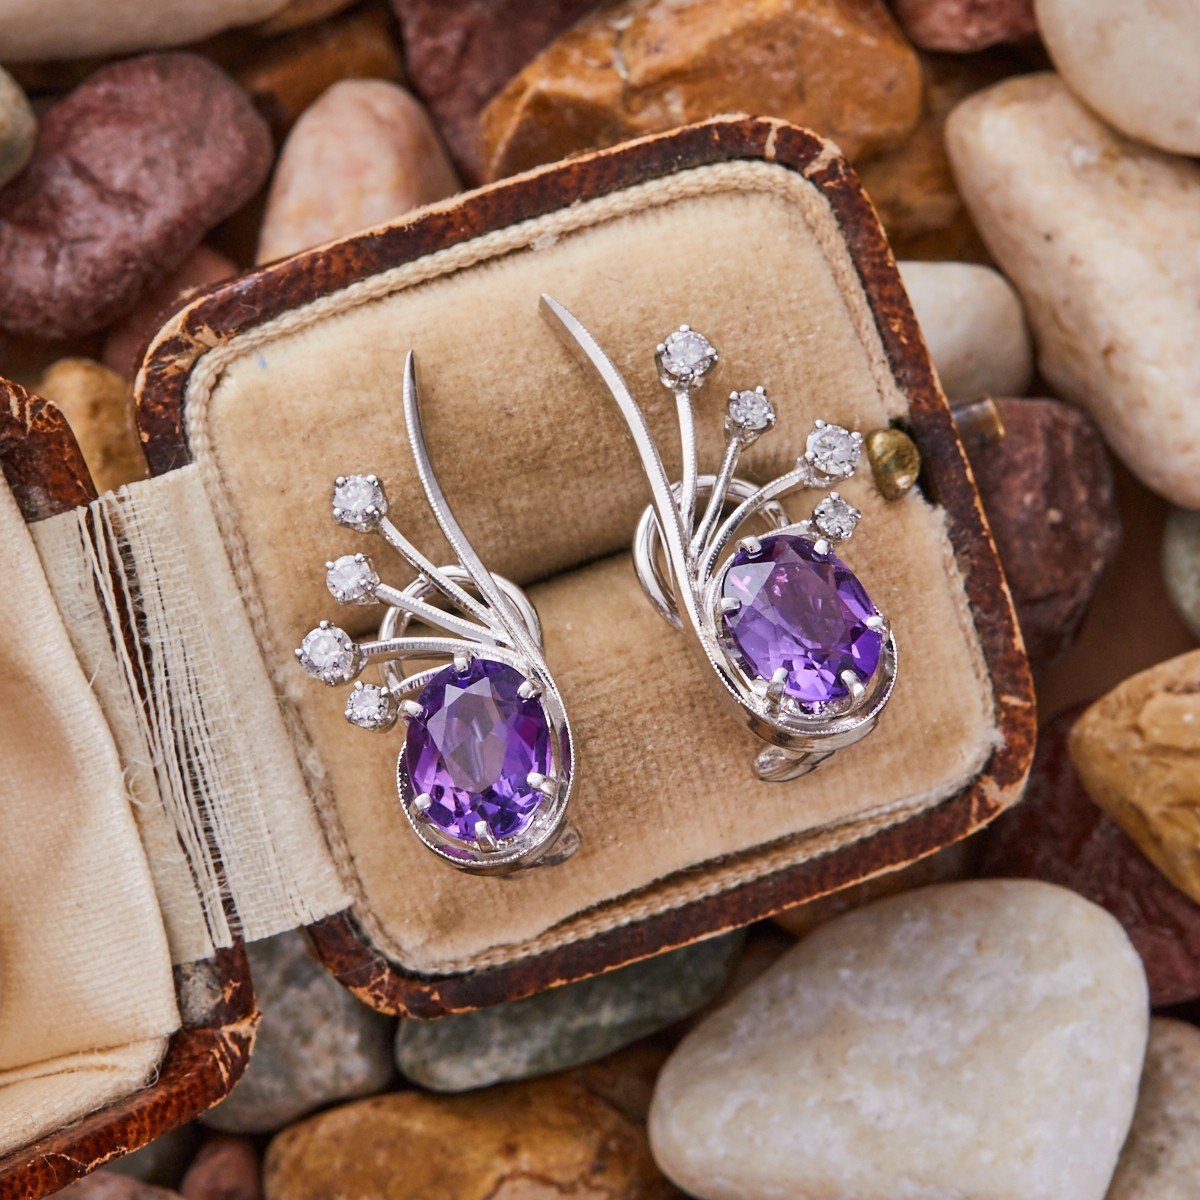 Details about   14K White Gold Oval Amethyst and Diamond Earrings 